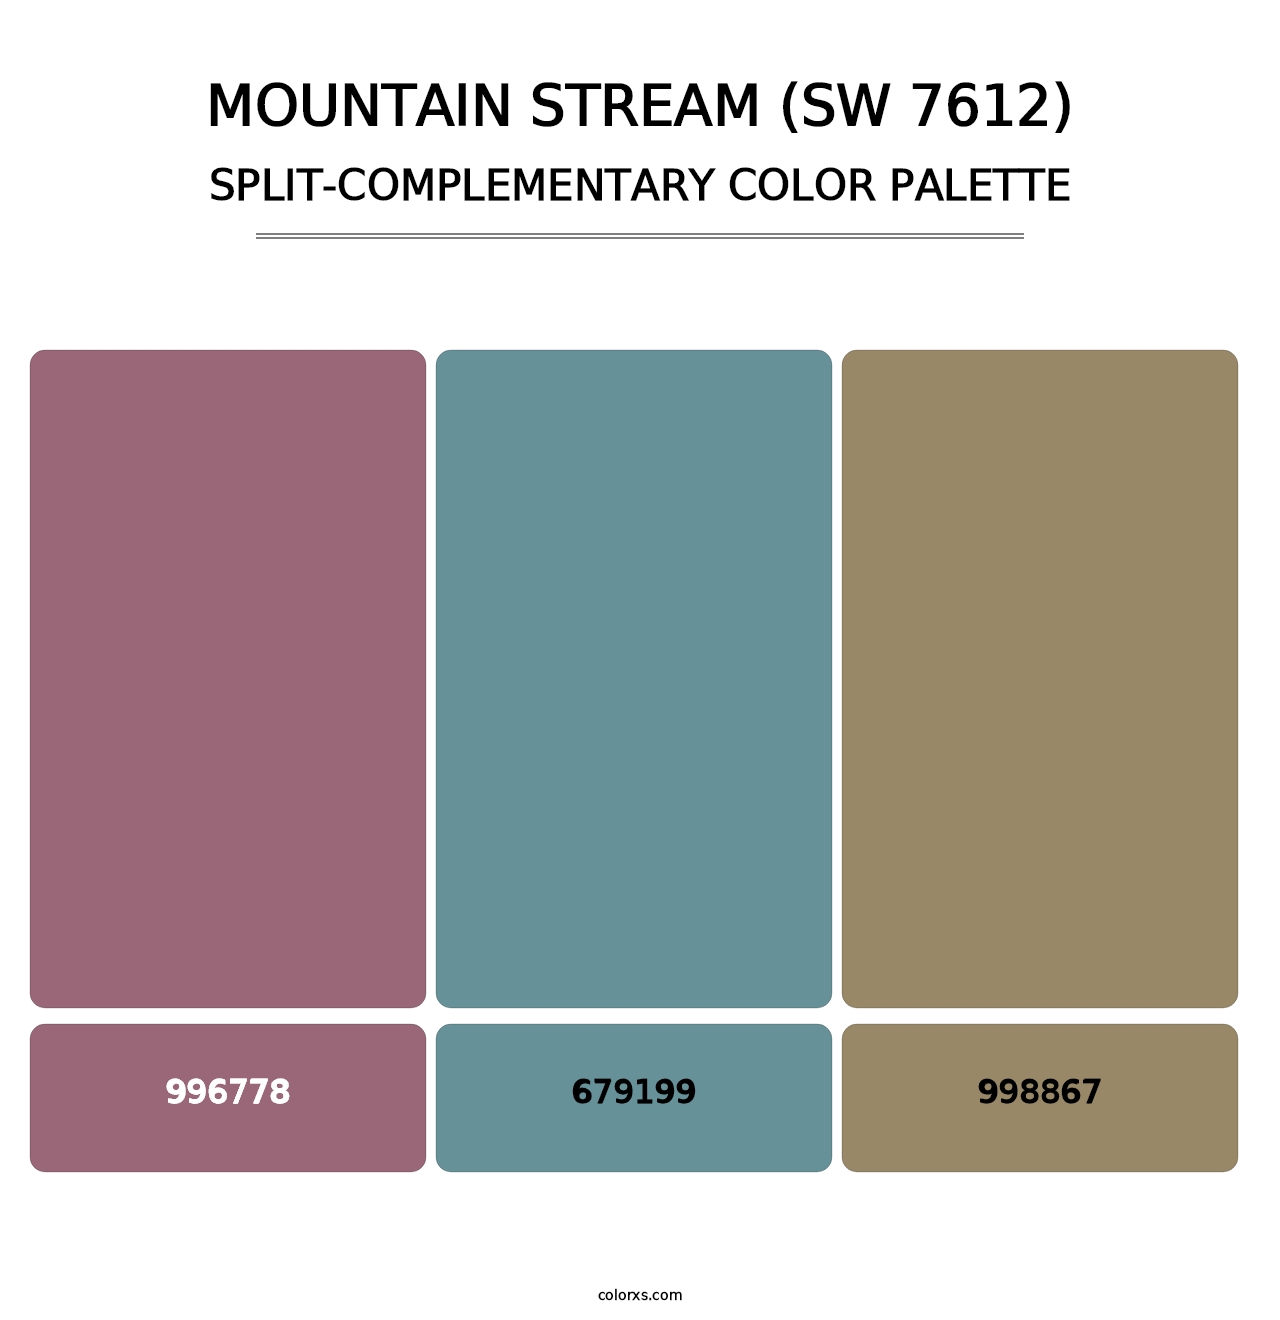 Mountain Stream (SW 7612) - Split-Complementary Color Palette